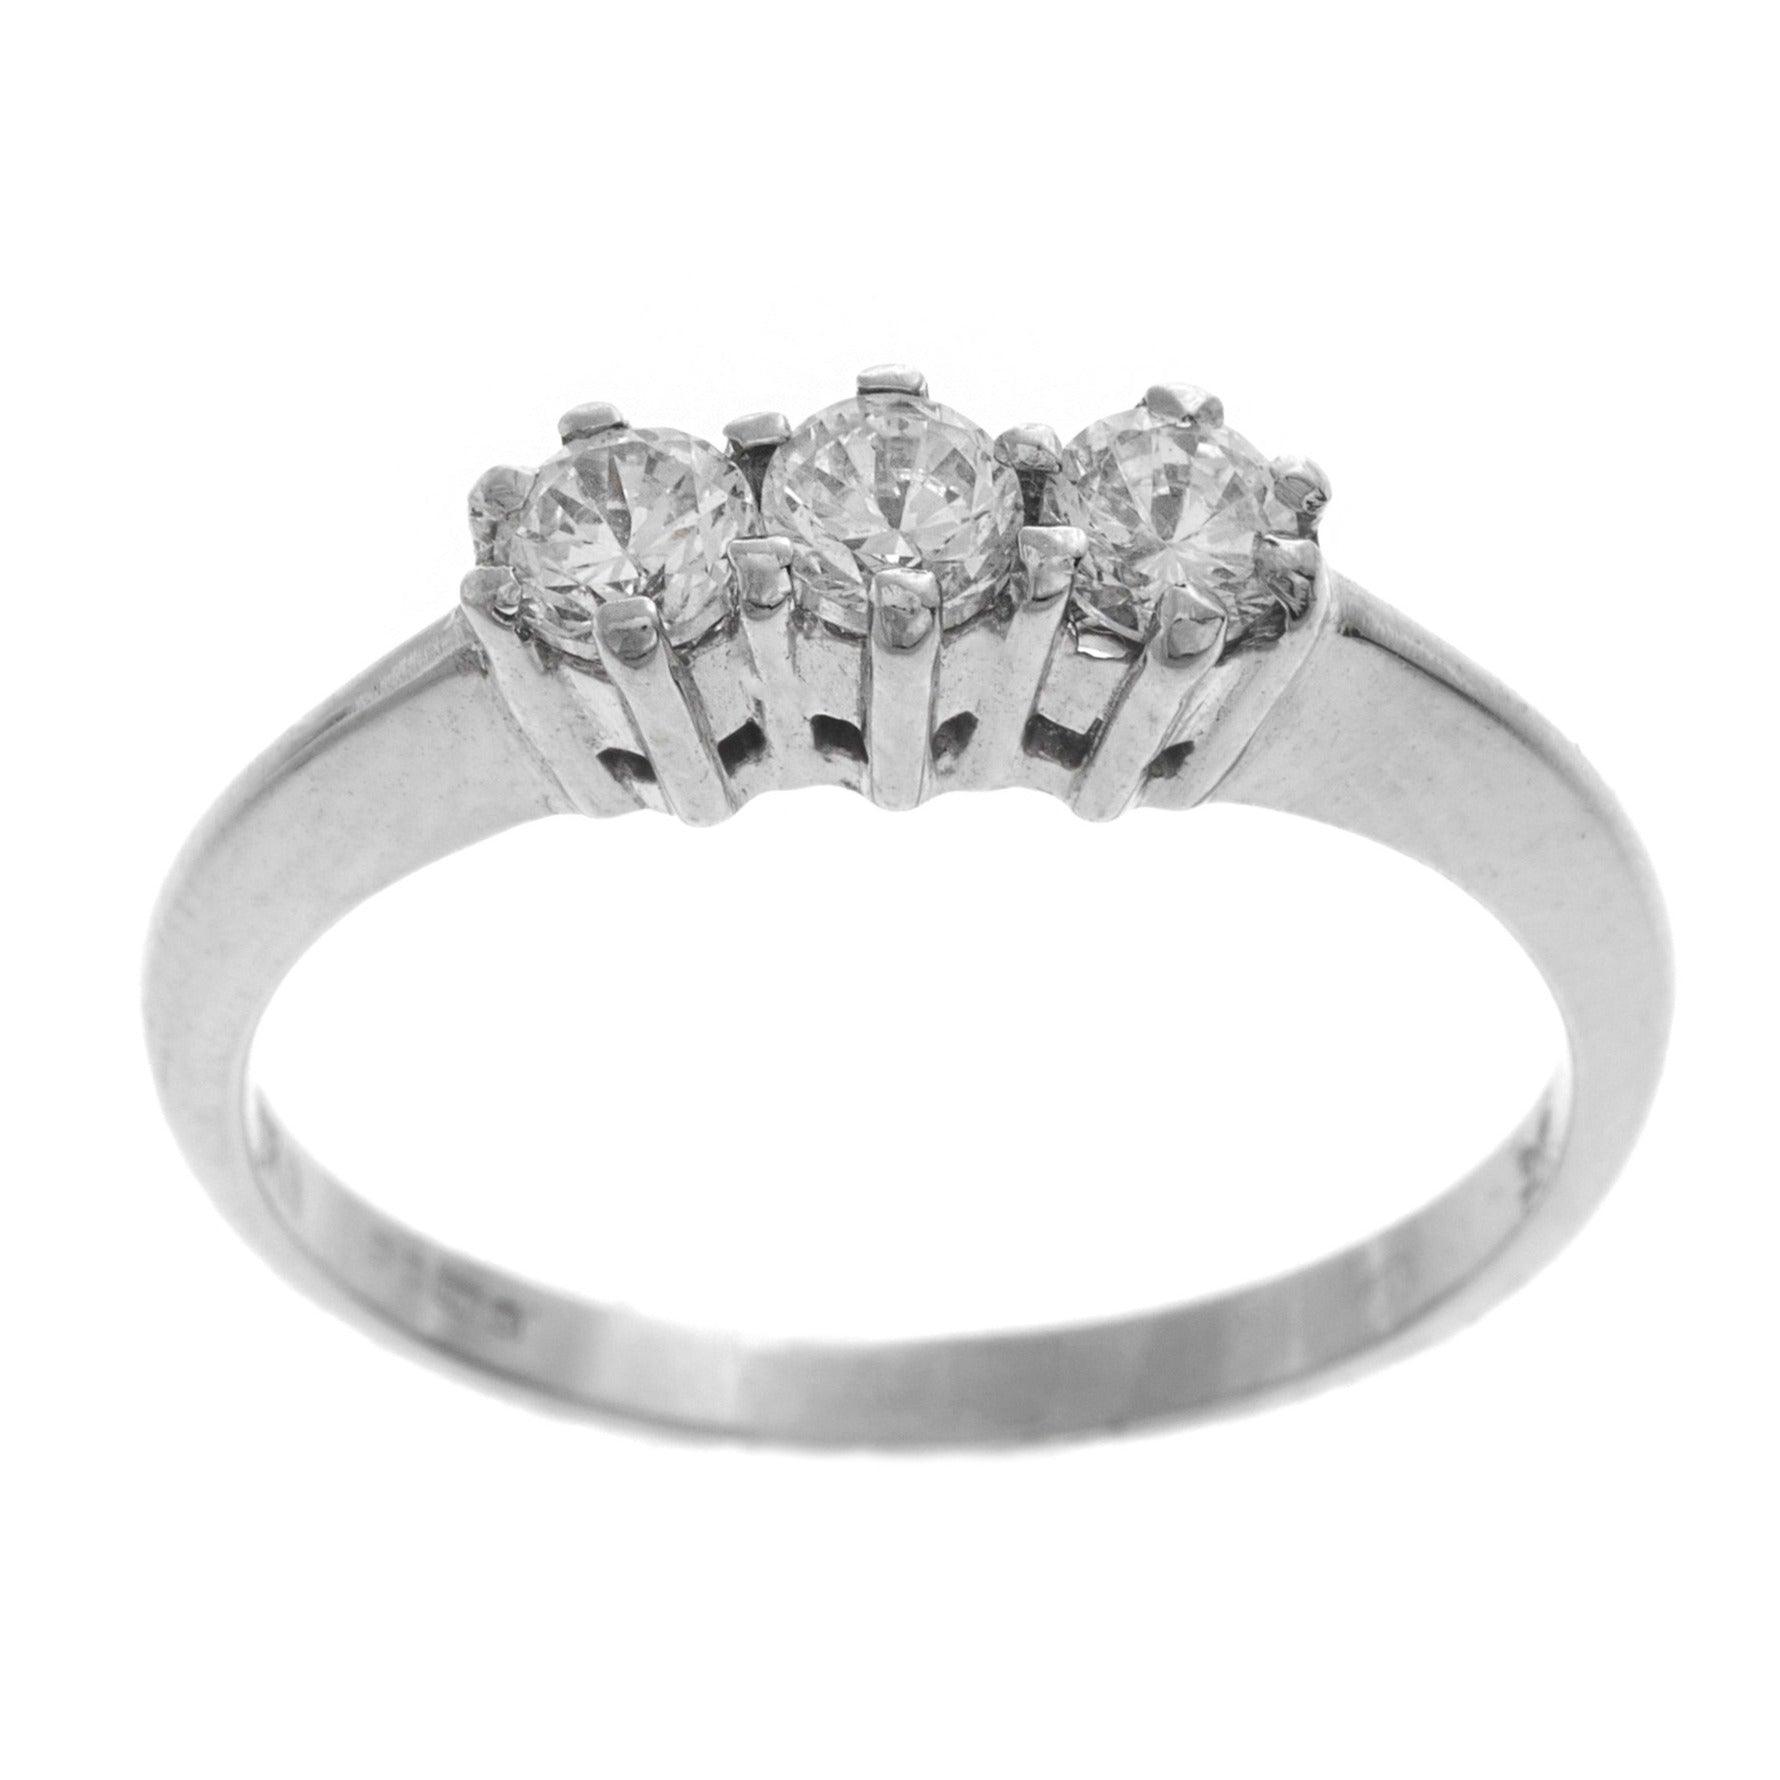 18ct White Gold Cubic Zirconia Trilogy Ring LR-2498 - Minar Jewellers